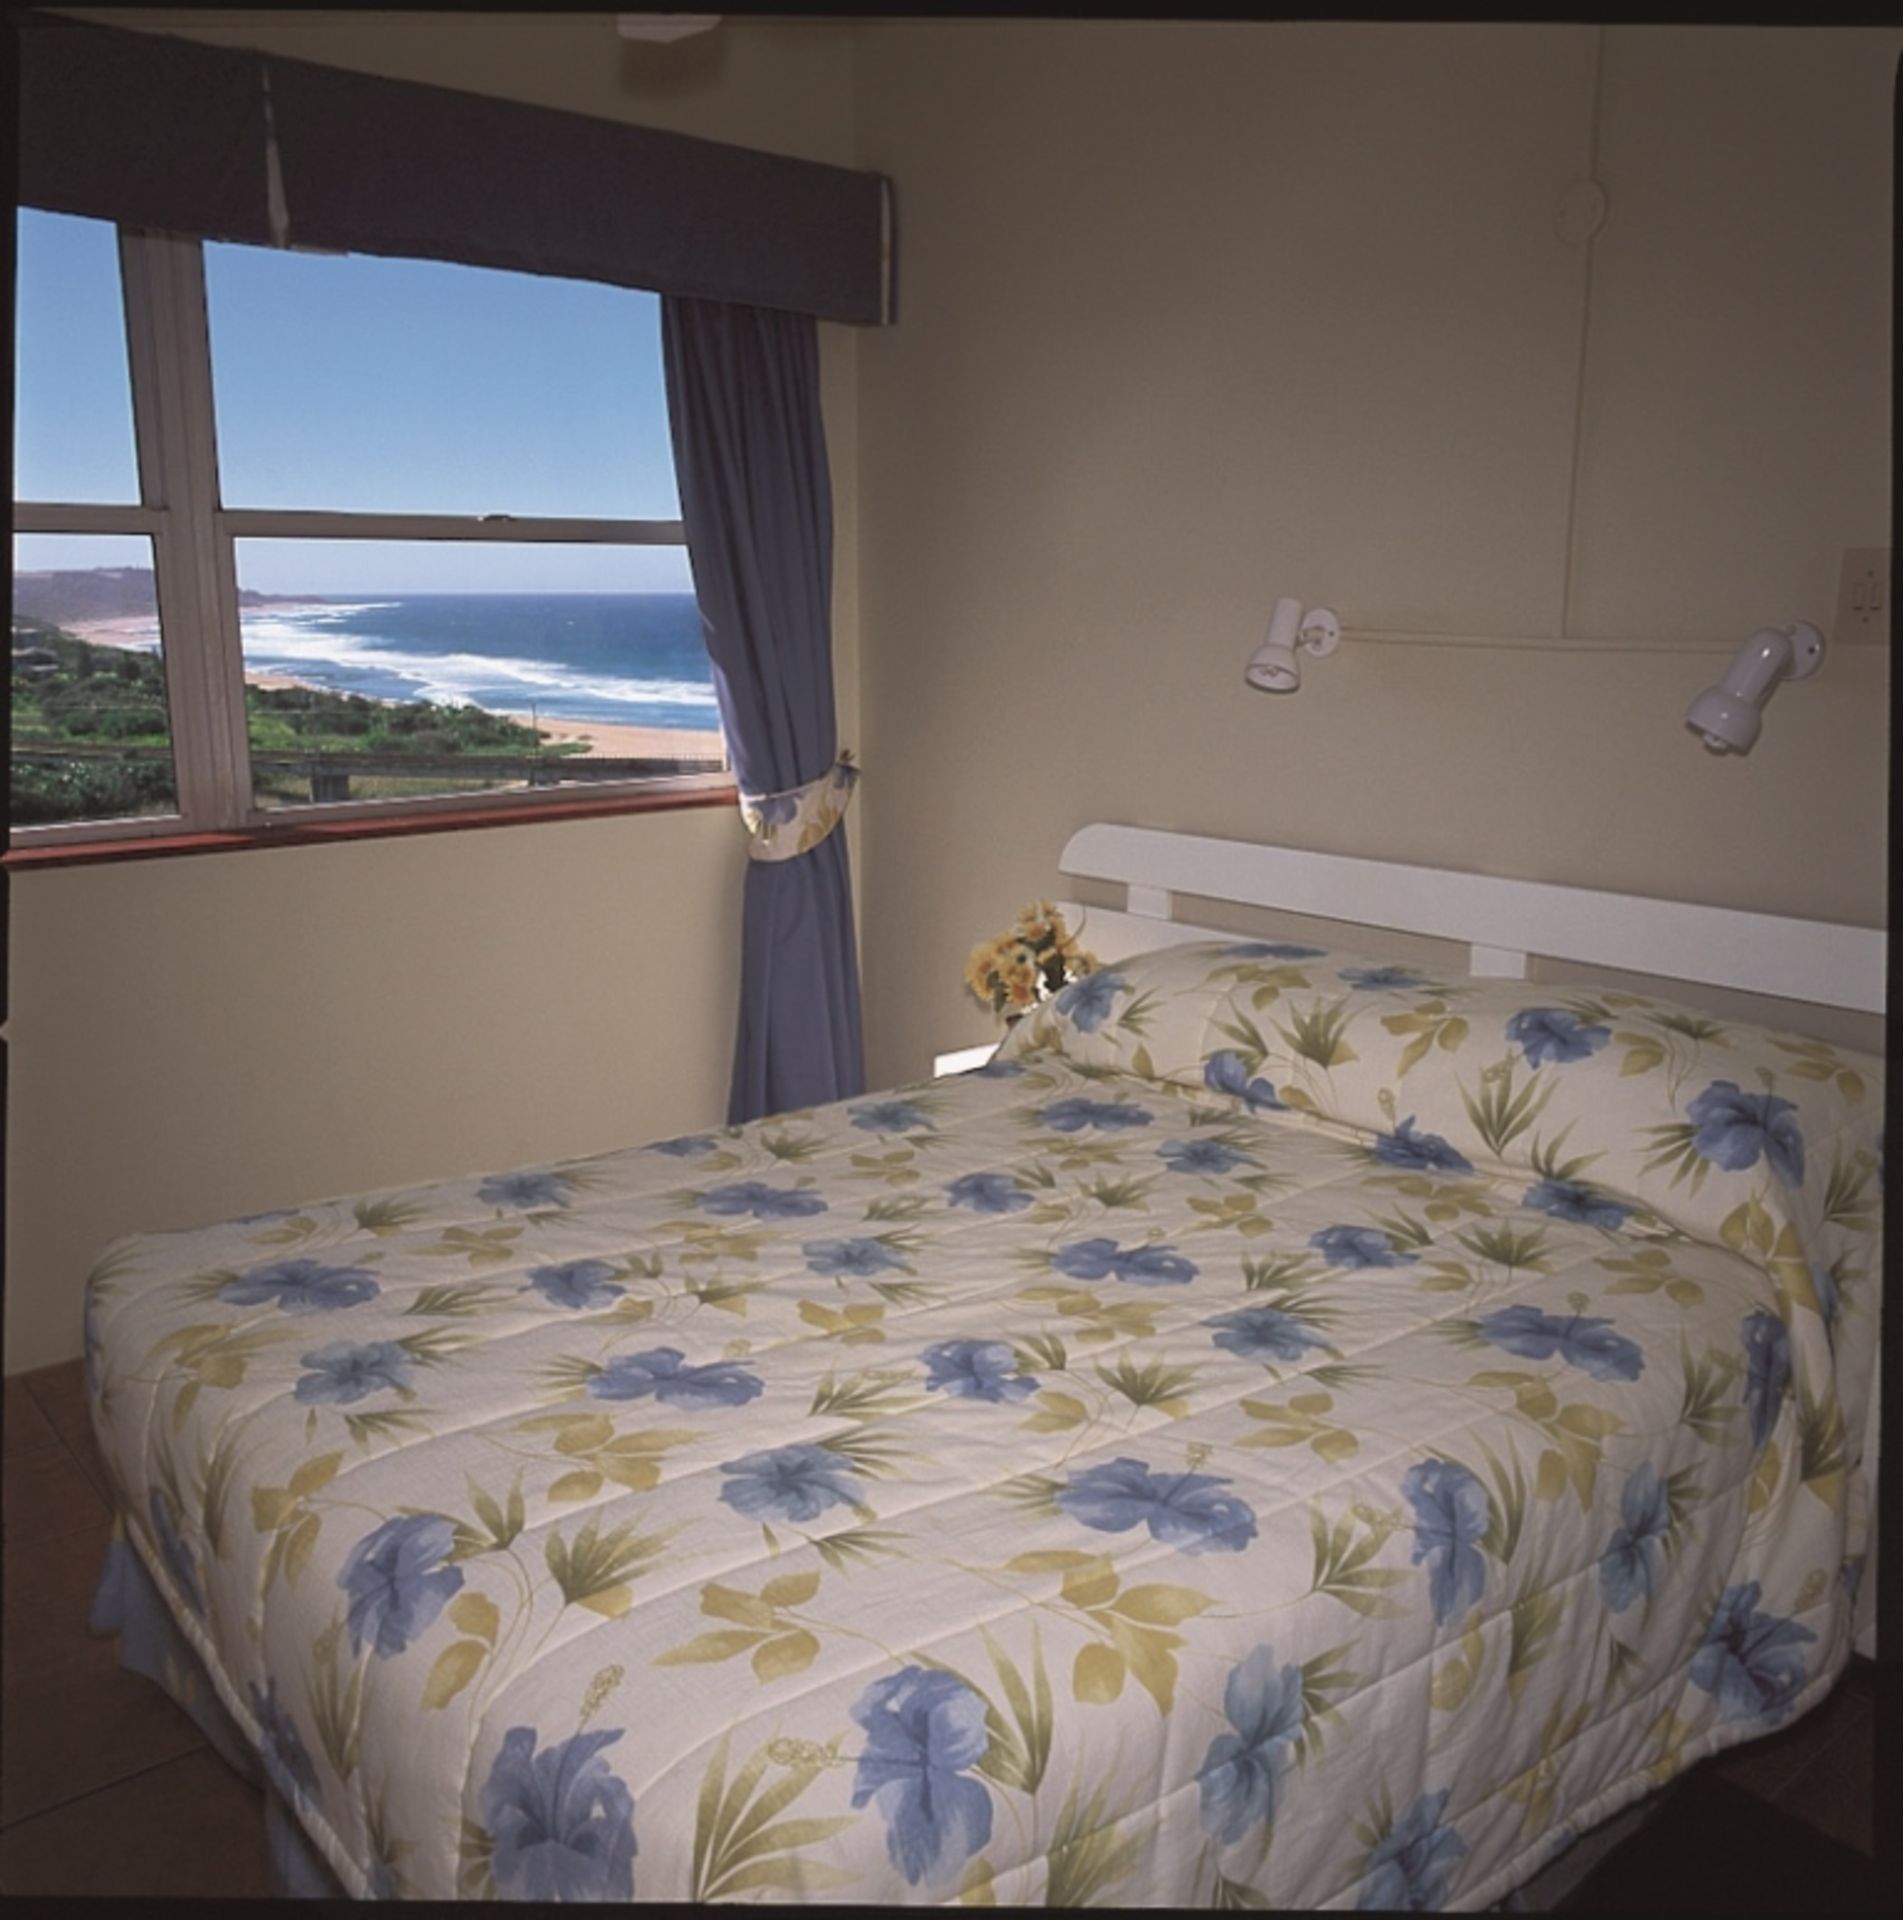 Pearly Shells - 3 Beds (8 Sleepers Max)  . Date - 27/05/2016 - 03/06/2016 - (Shareblock) - Image 26 of 32